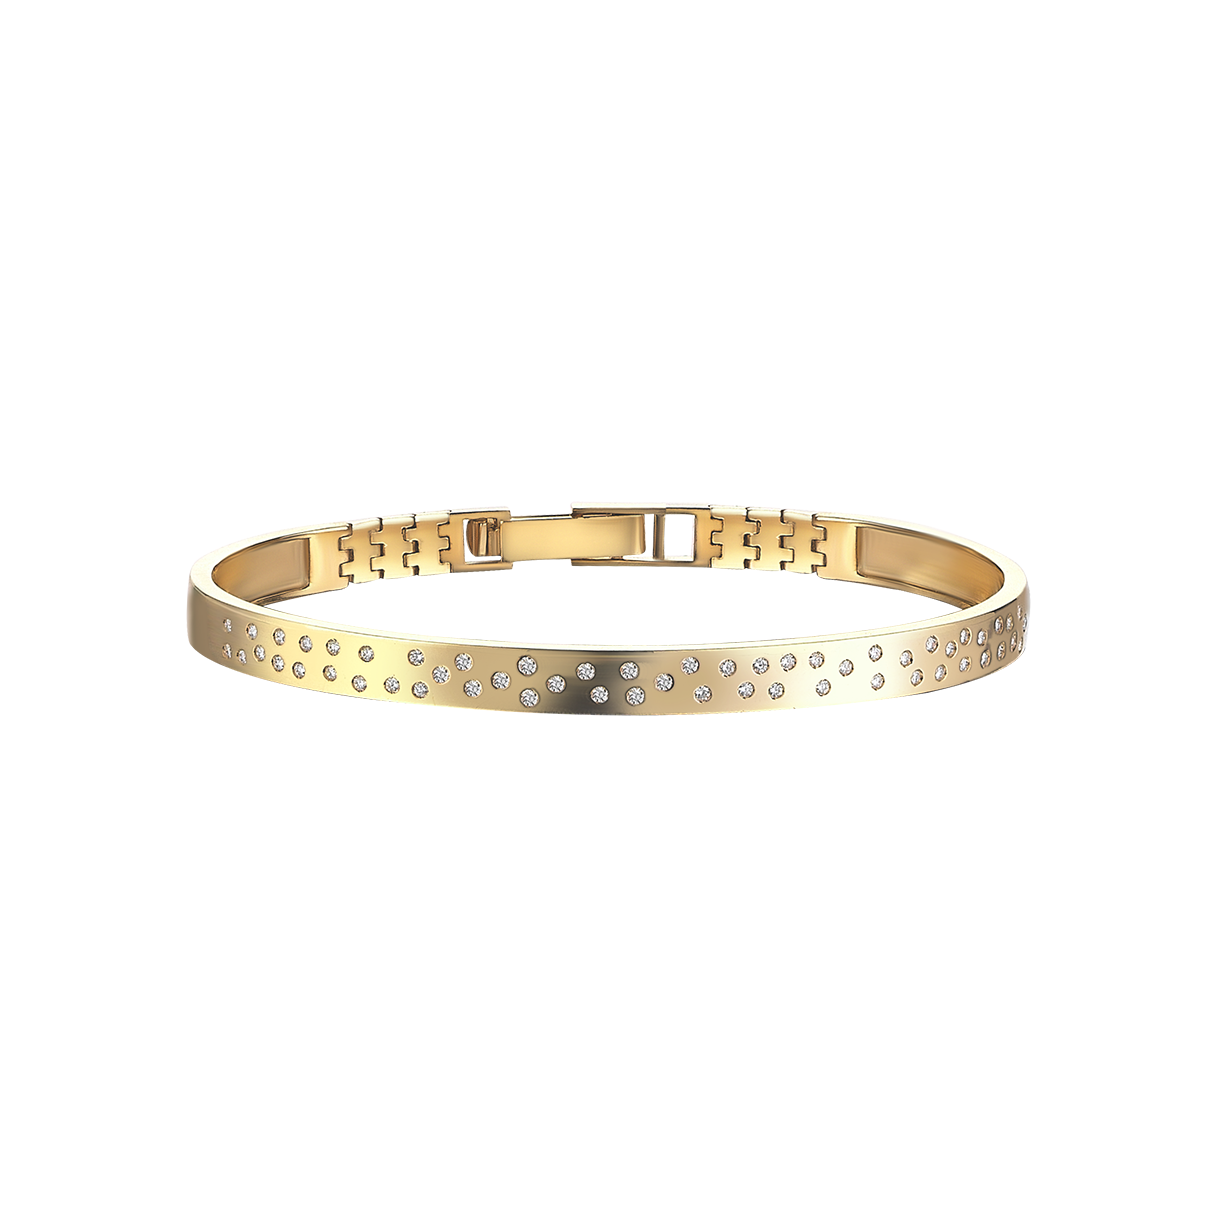 Pave Rigid Fairy Dust Bracelet in Yellow Gold - Her Story Shop